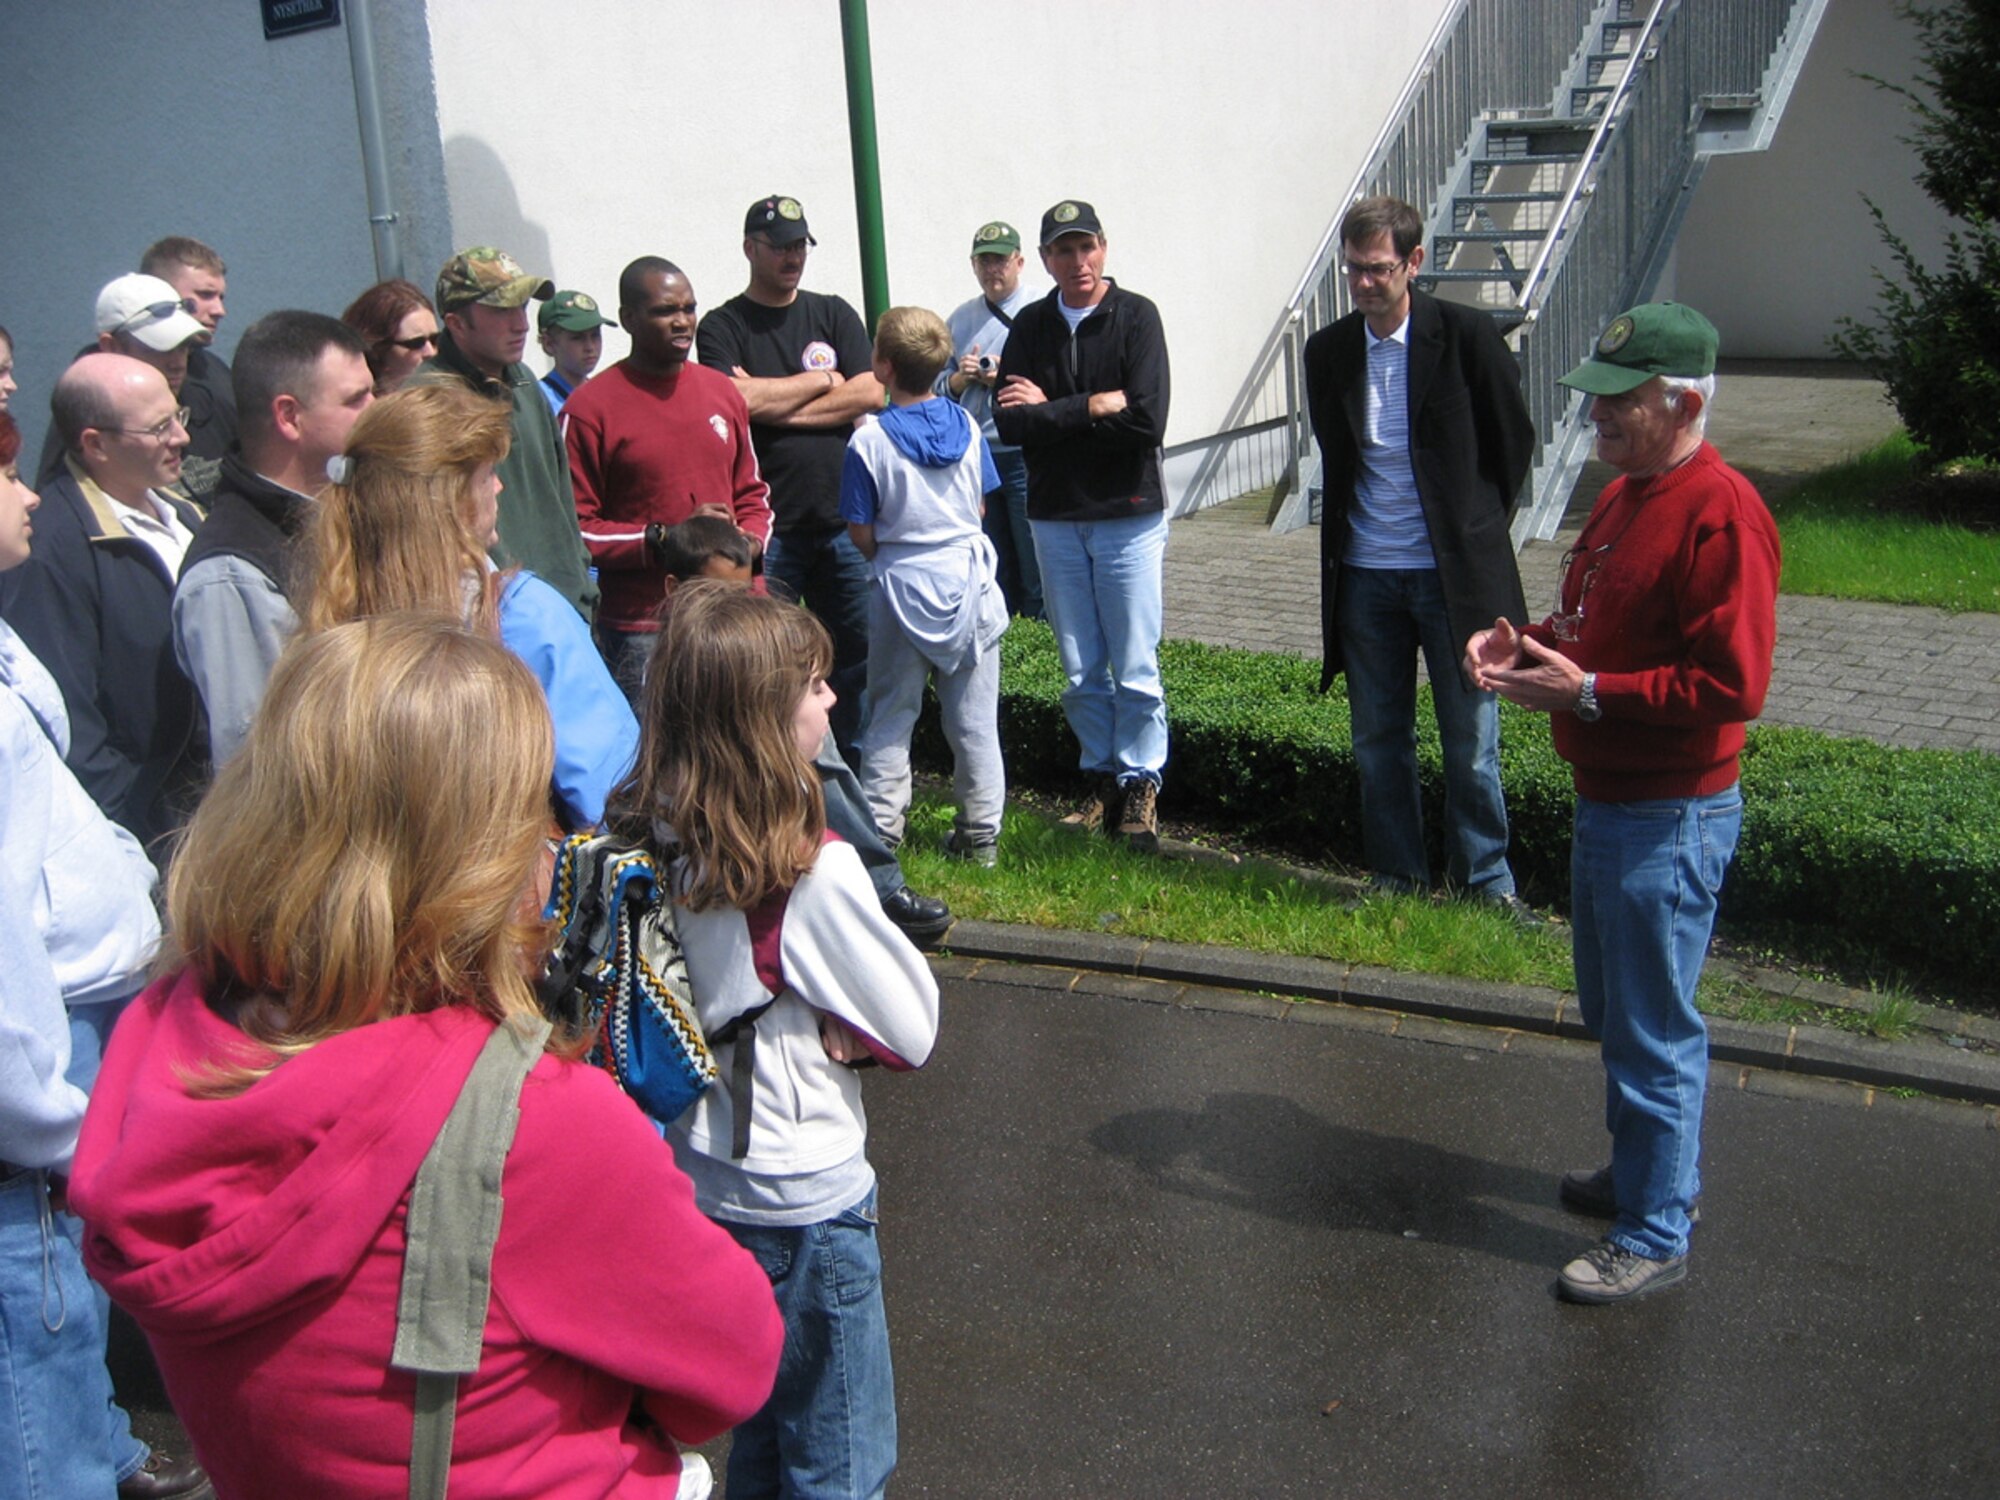 SPANGDAHLEM AIR BASE GERMANY -- Roger Feller, who owns and operates the 385th Bomb Group Museum in Perle, Luxembourg, speaks about the museum and its history during a visit July 5, 2007. Several people from Spangdahlem AB visited the museum as part of a trip sponsered by the European Military History Group that day. (U.S. Air Force photo/Staff Sgt. Andrea Knudson)